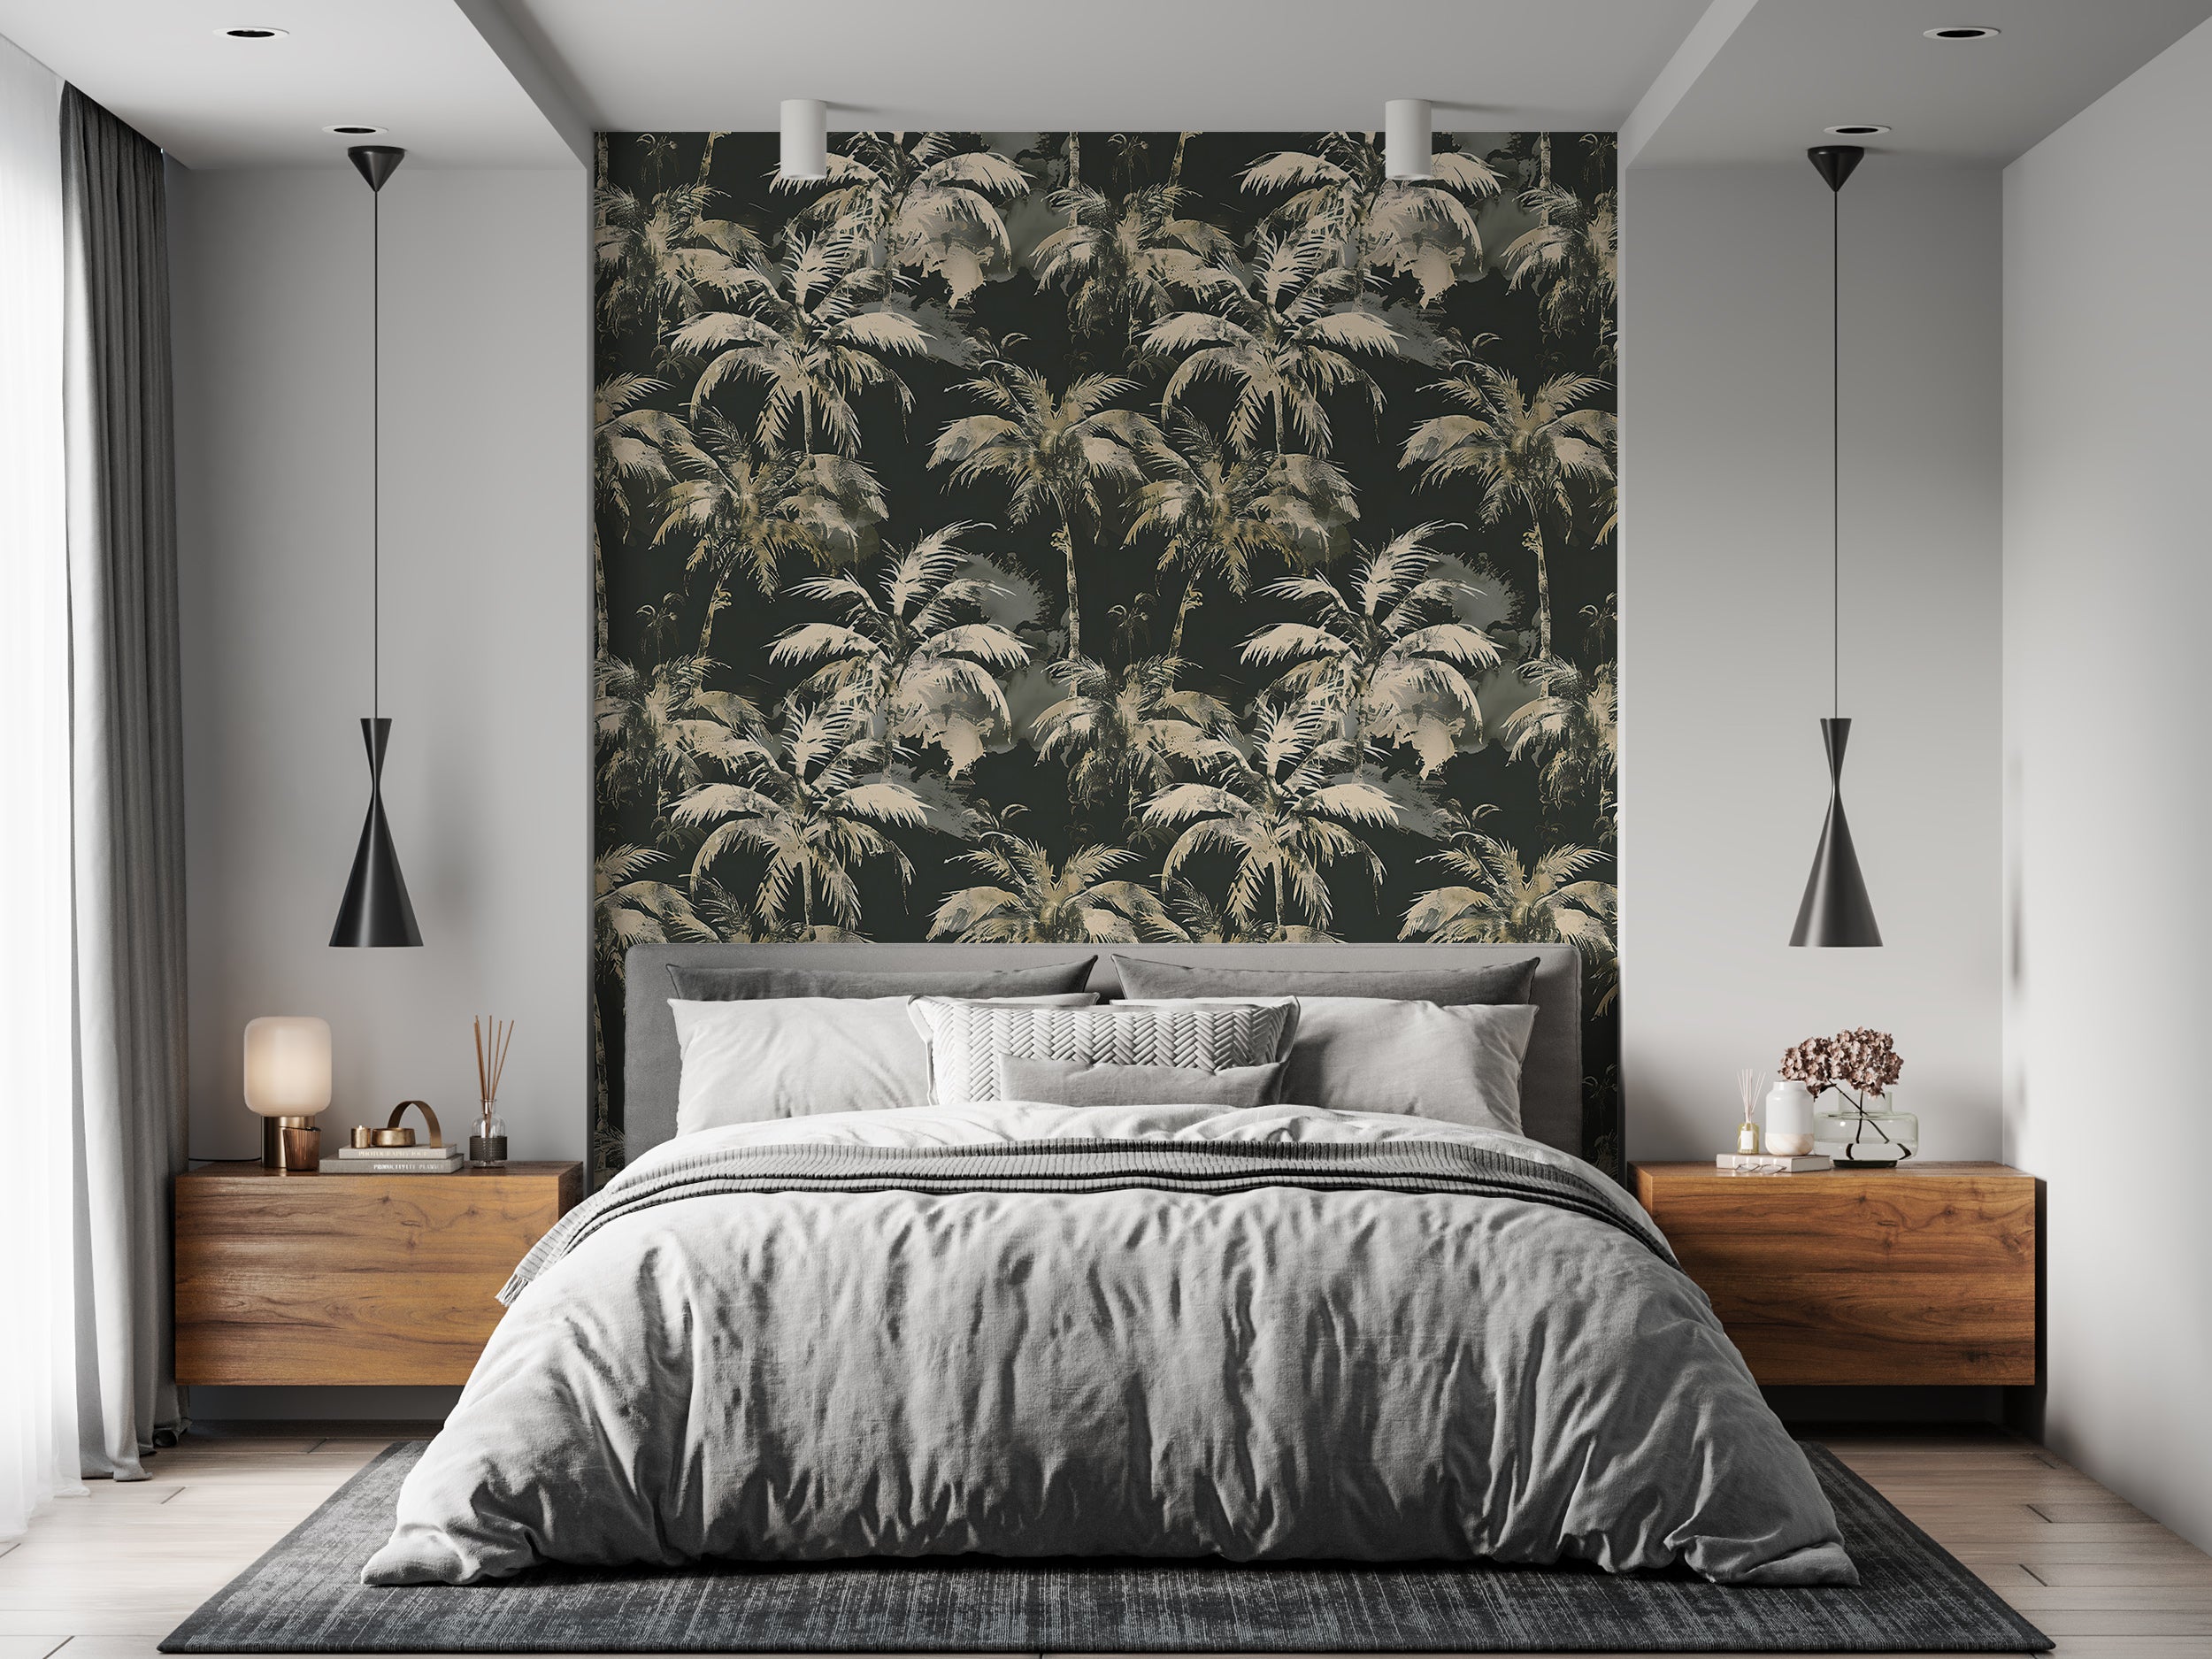 Palm Leaves Dark Wallpaper, Green and Beige Tropical Wall Decal, Peel and Stick Palm Tree Wallpaper, Removable Coastal Botanical Decor